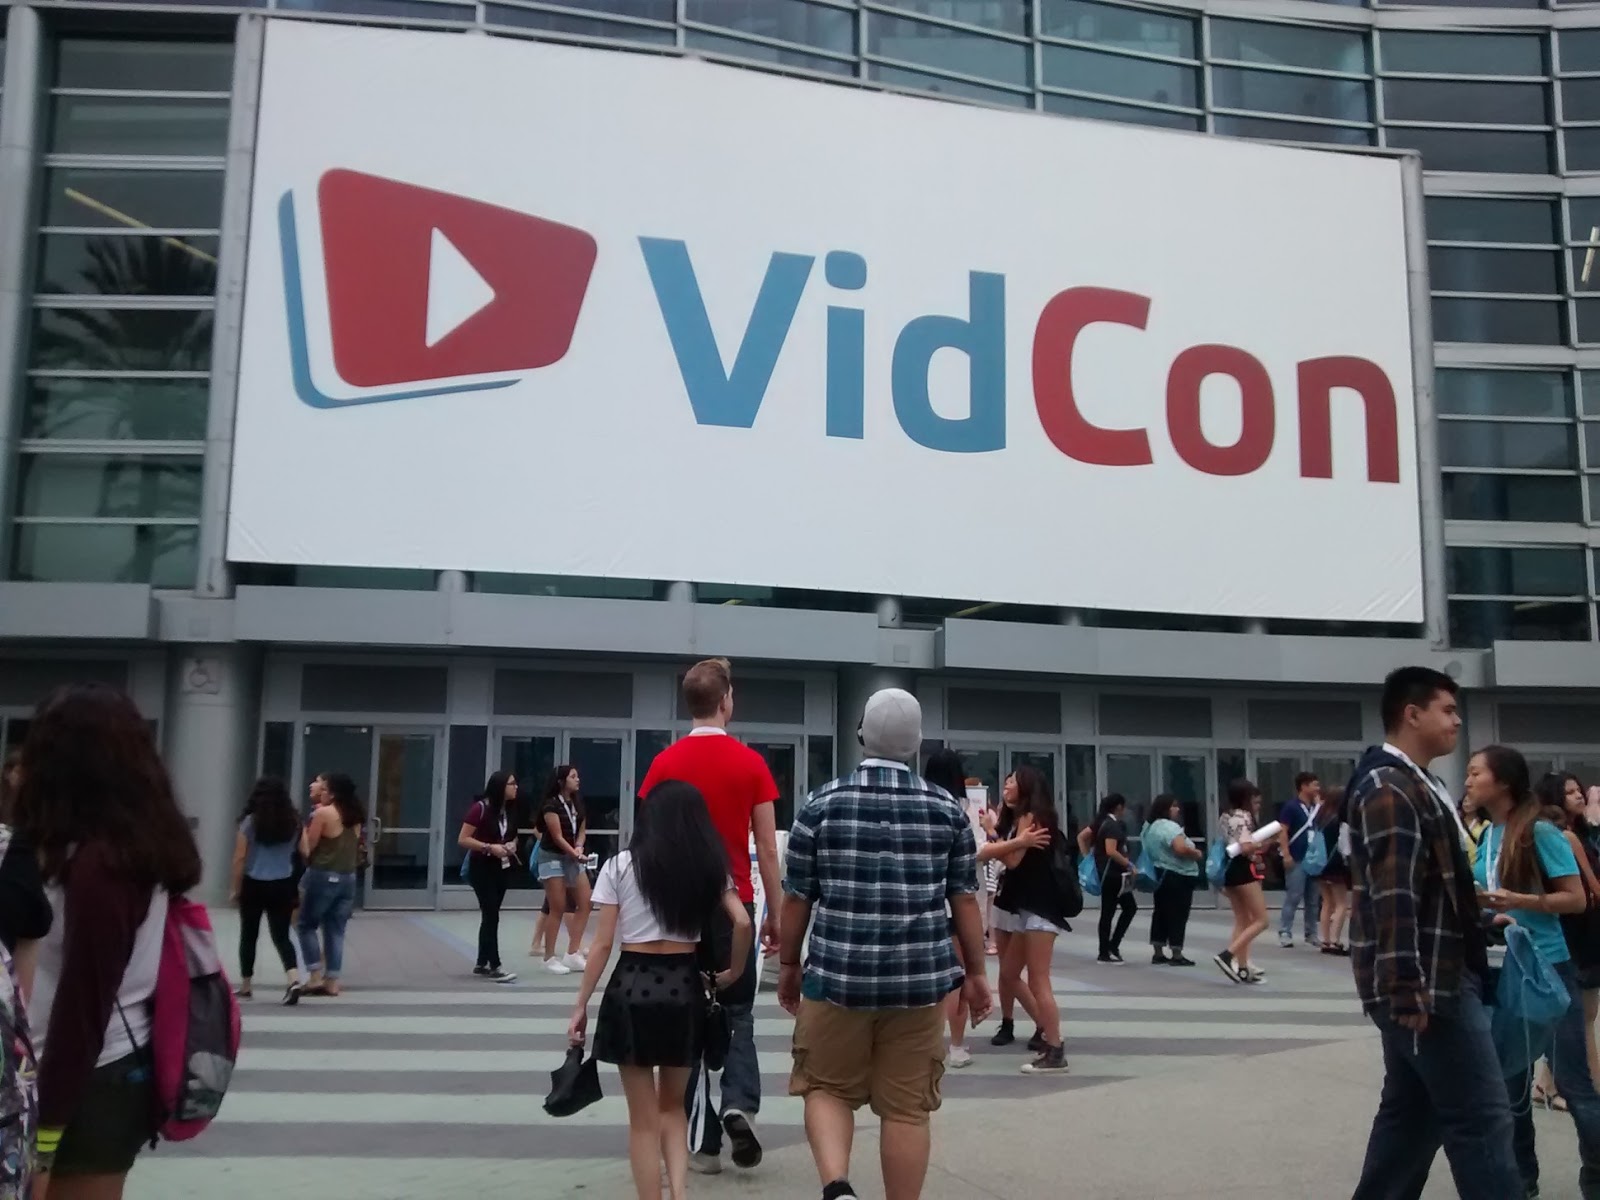 YouTube's VidCon conference YouTube VR180 and other updates Silicon